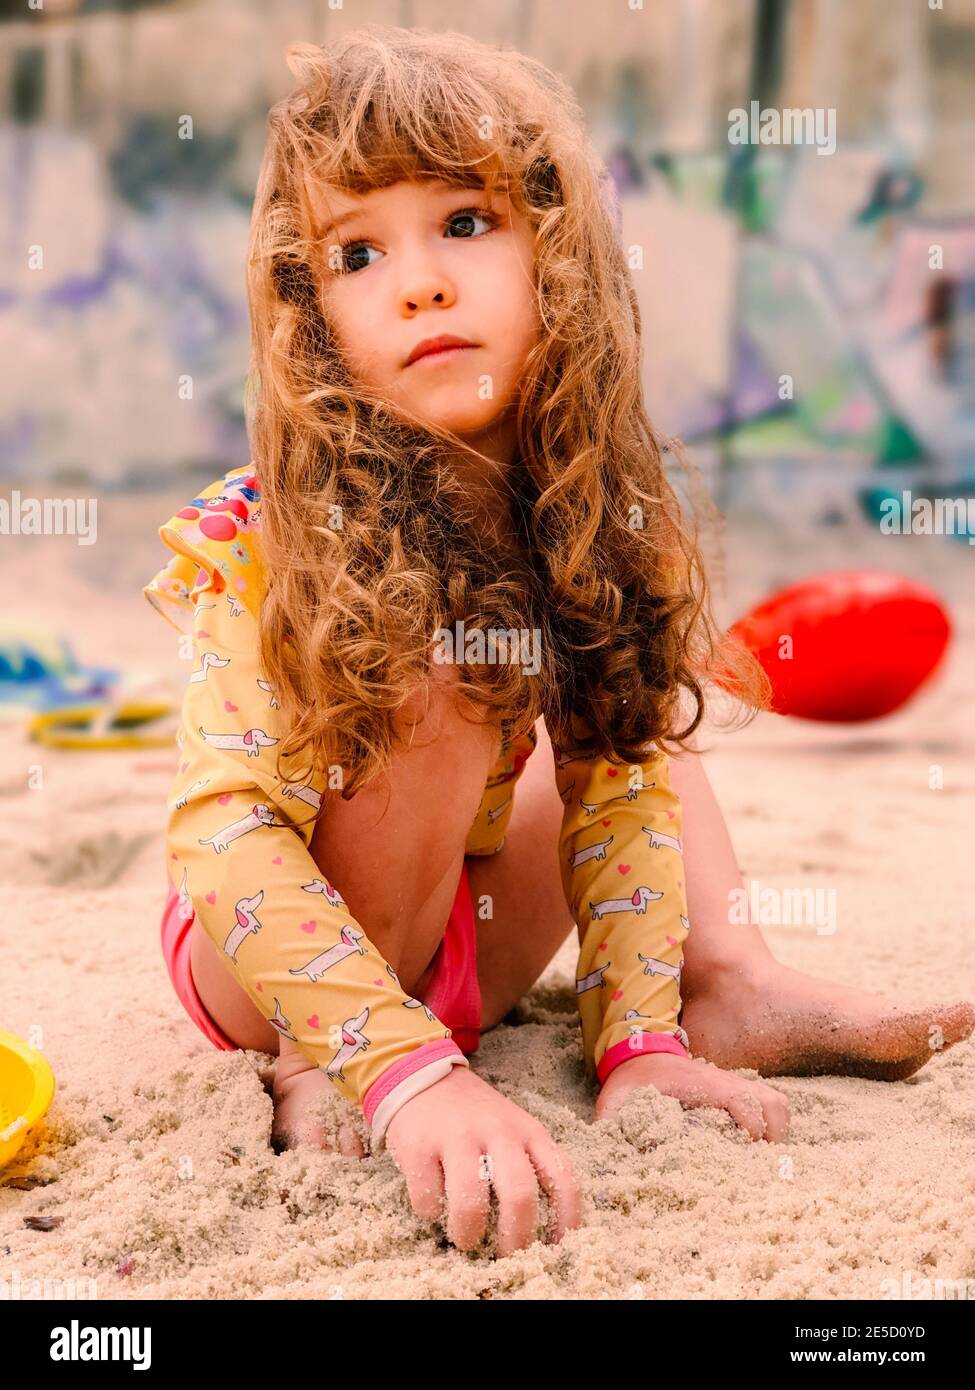 Portrait of a girl sitting on the beach playing with sand, Rio de Janeiro, Brazil Stock Photo